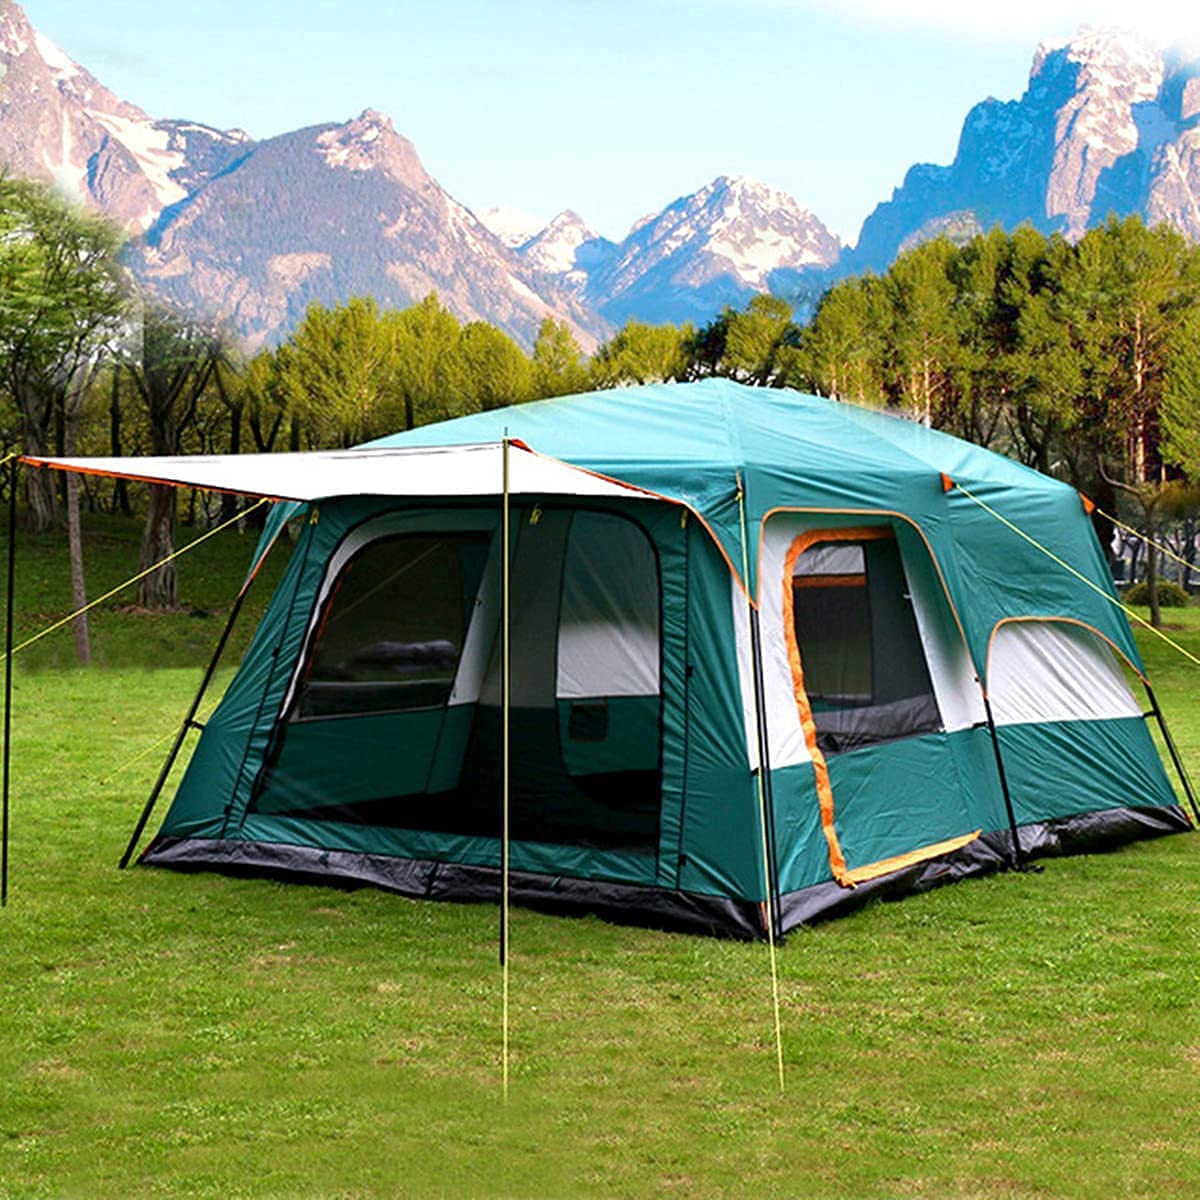 Nasmodo Family Tent House Dome Tent for Camping 3-12 Person Waterproof Tent Picnic,Hiking,Trekking Outdoor Tent House for Travel